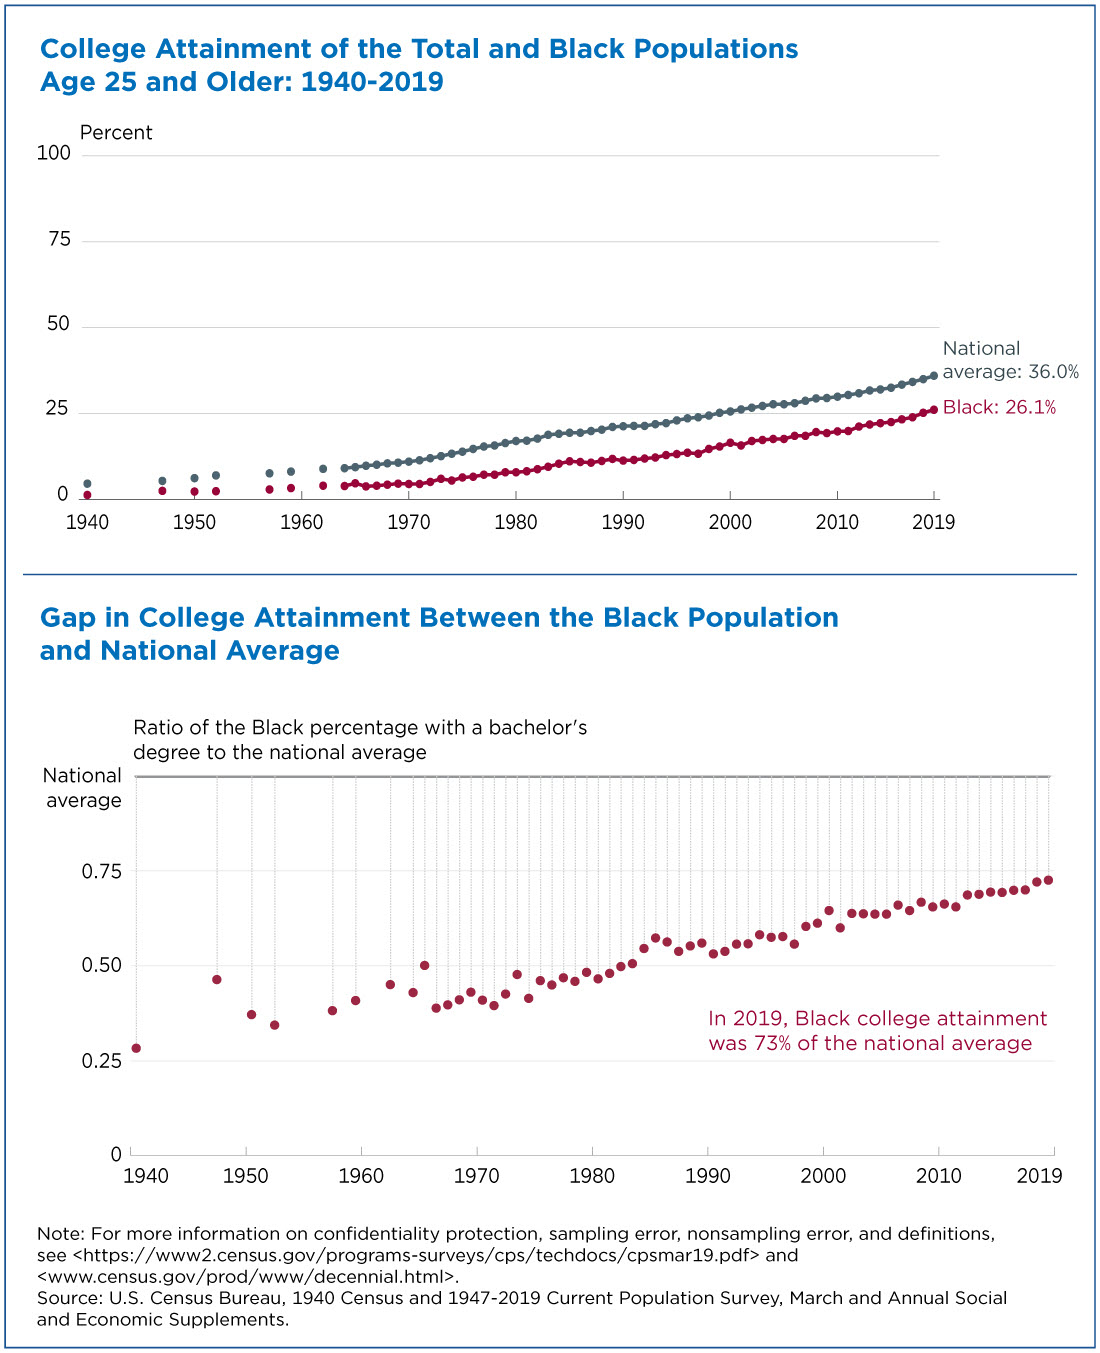 black-high-school-attainment-nearly-on-par-with-national-average-figure-02.jpeg